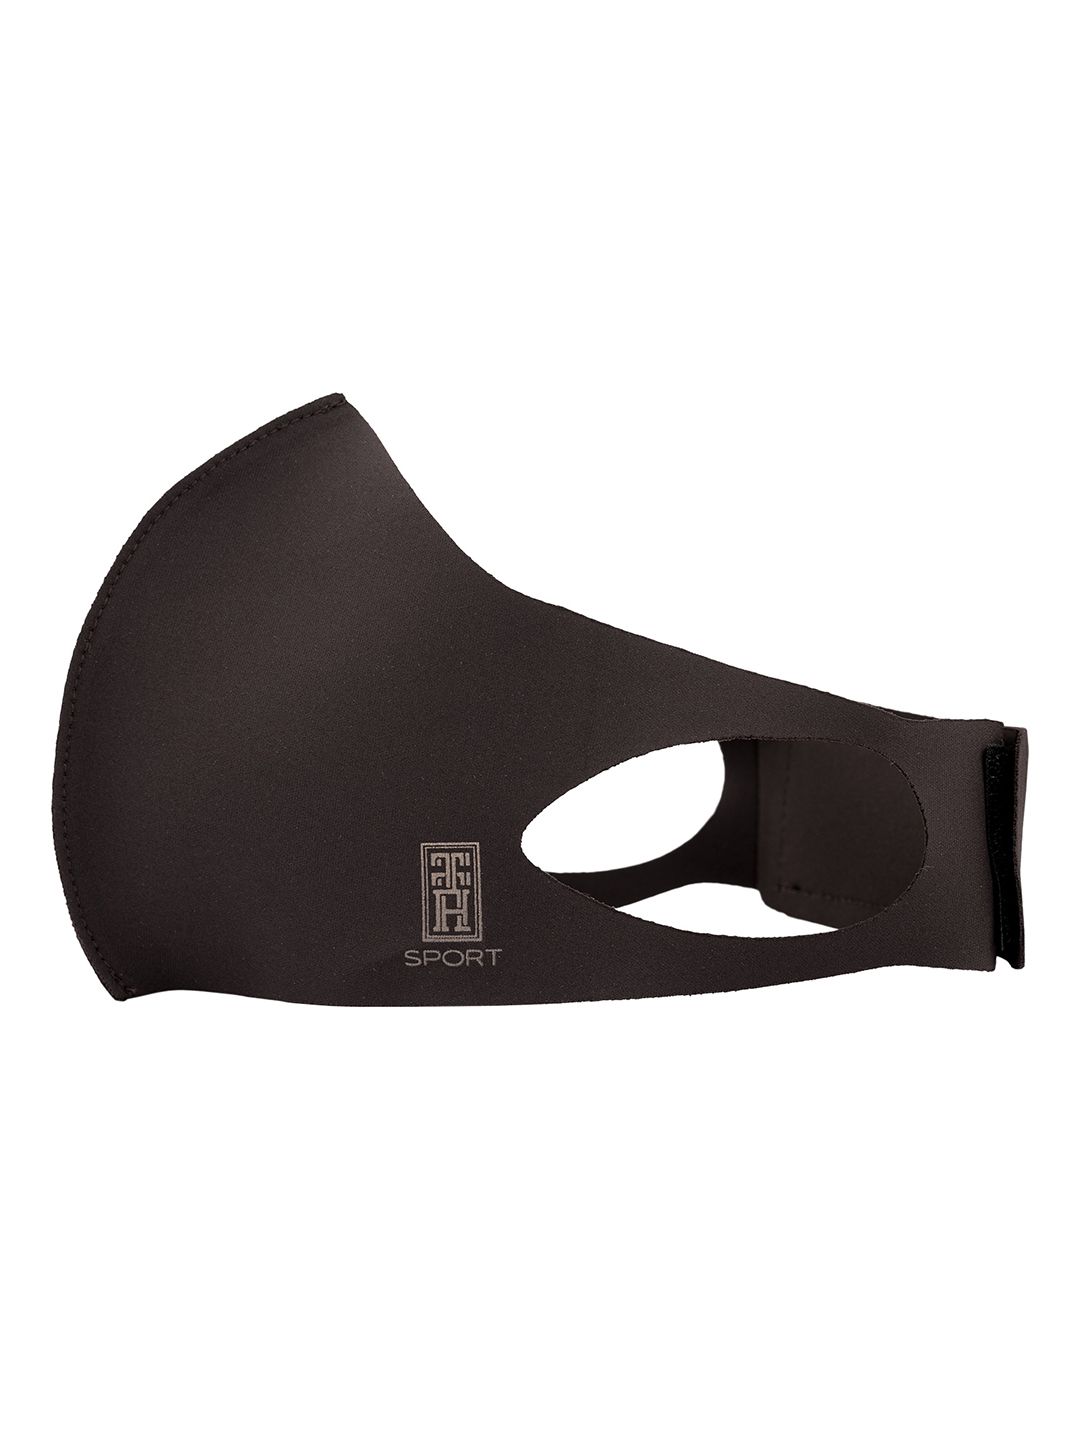 The Tie Hub Unisex Brown Solid 1-Ply Reusable Neo Sports Cloth Mask With Band Price in India